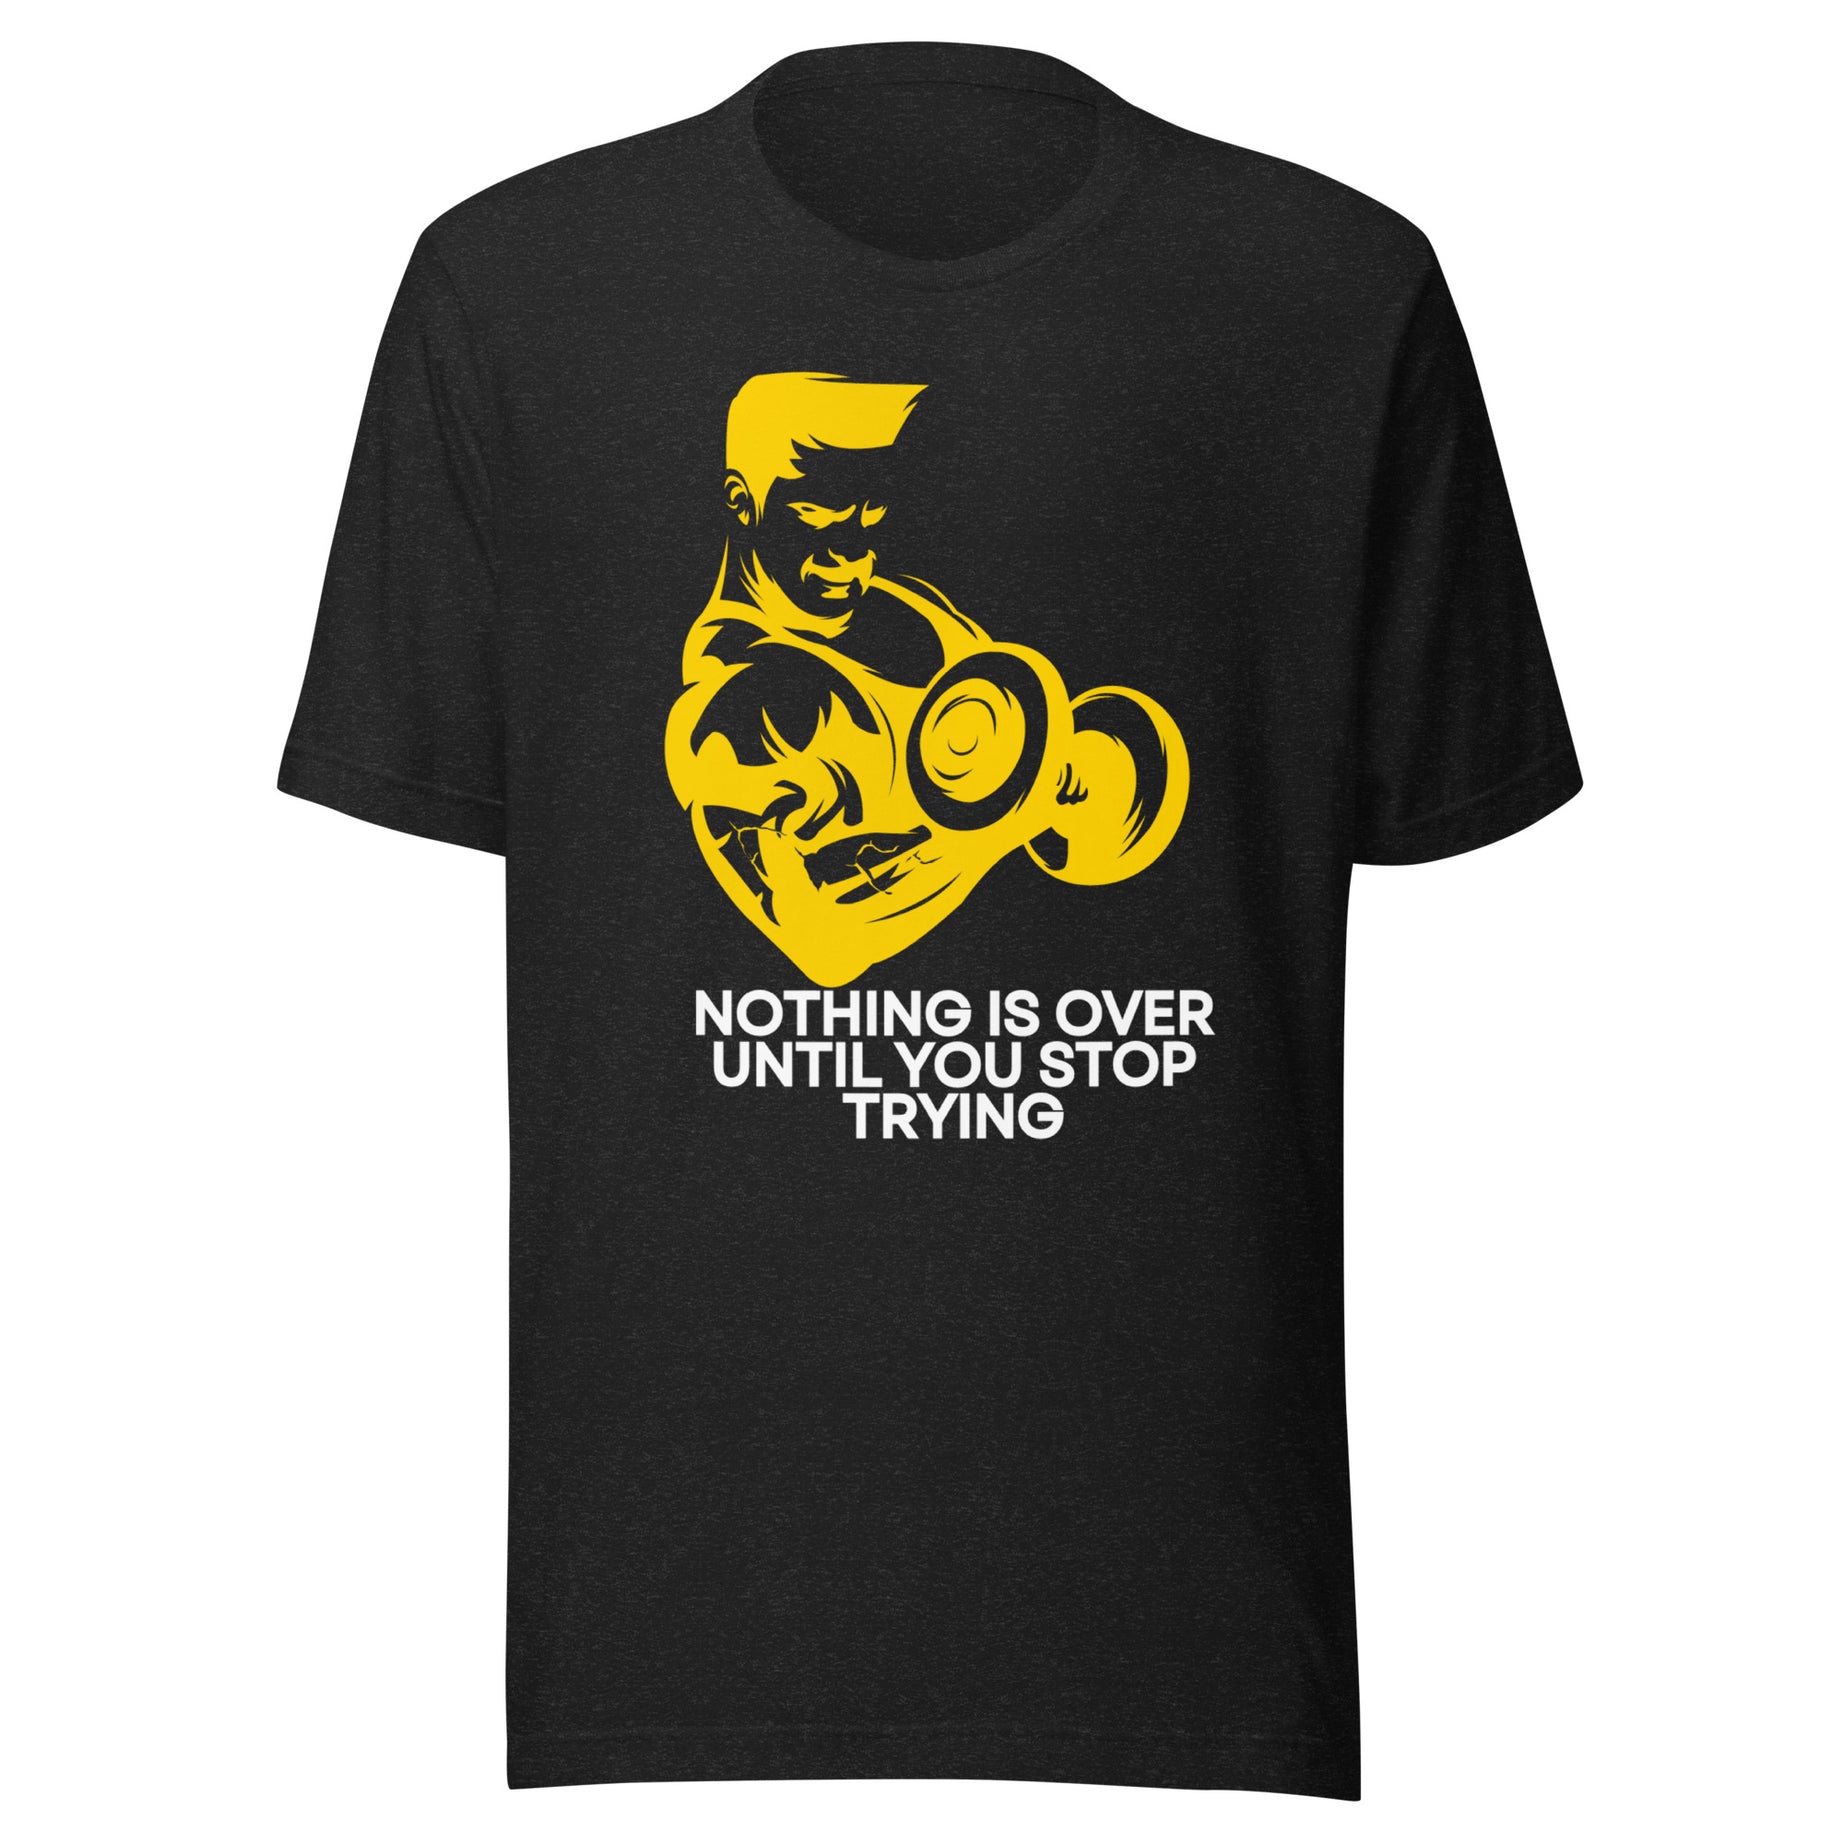 NOTHING IS OVER UNTIL YOU STOP TRYING T-SHIRT